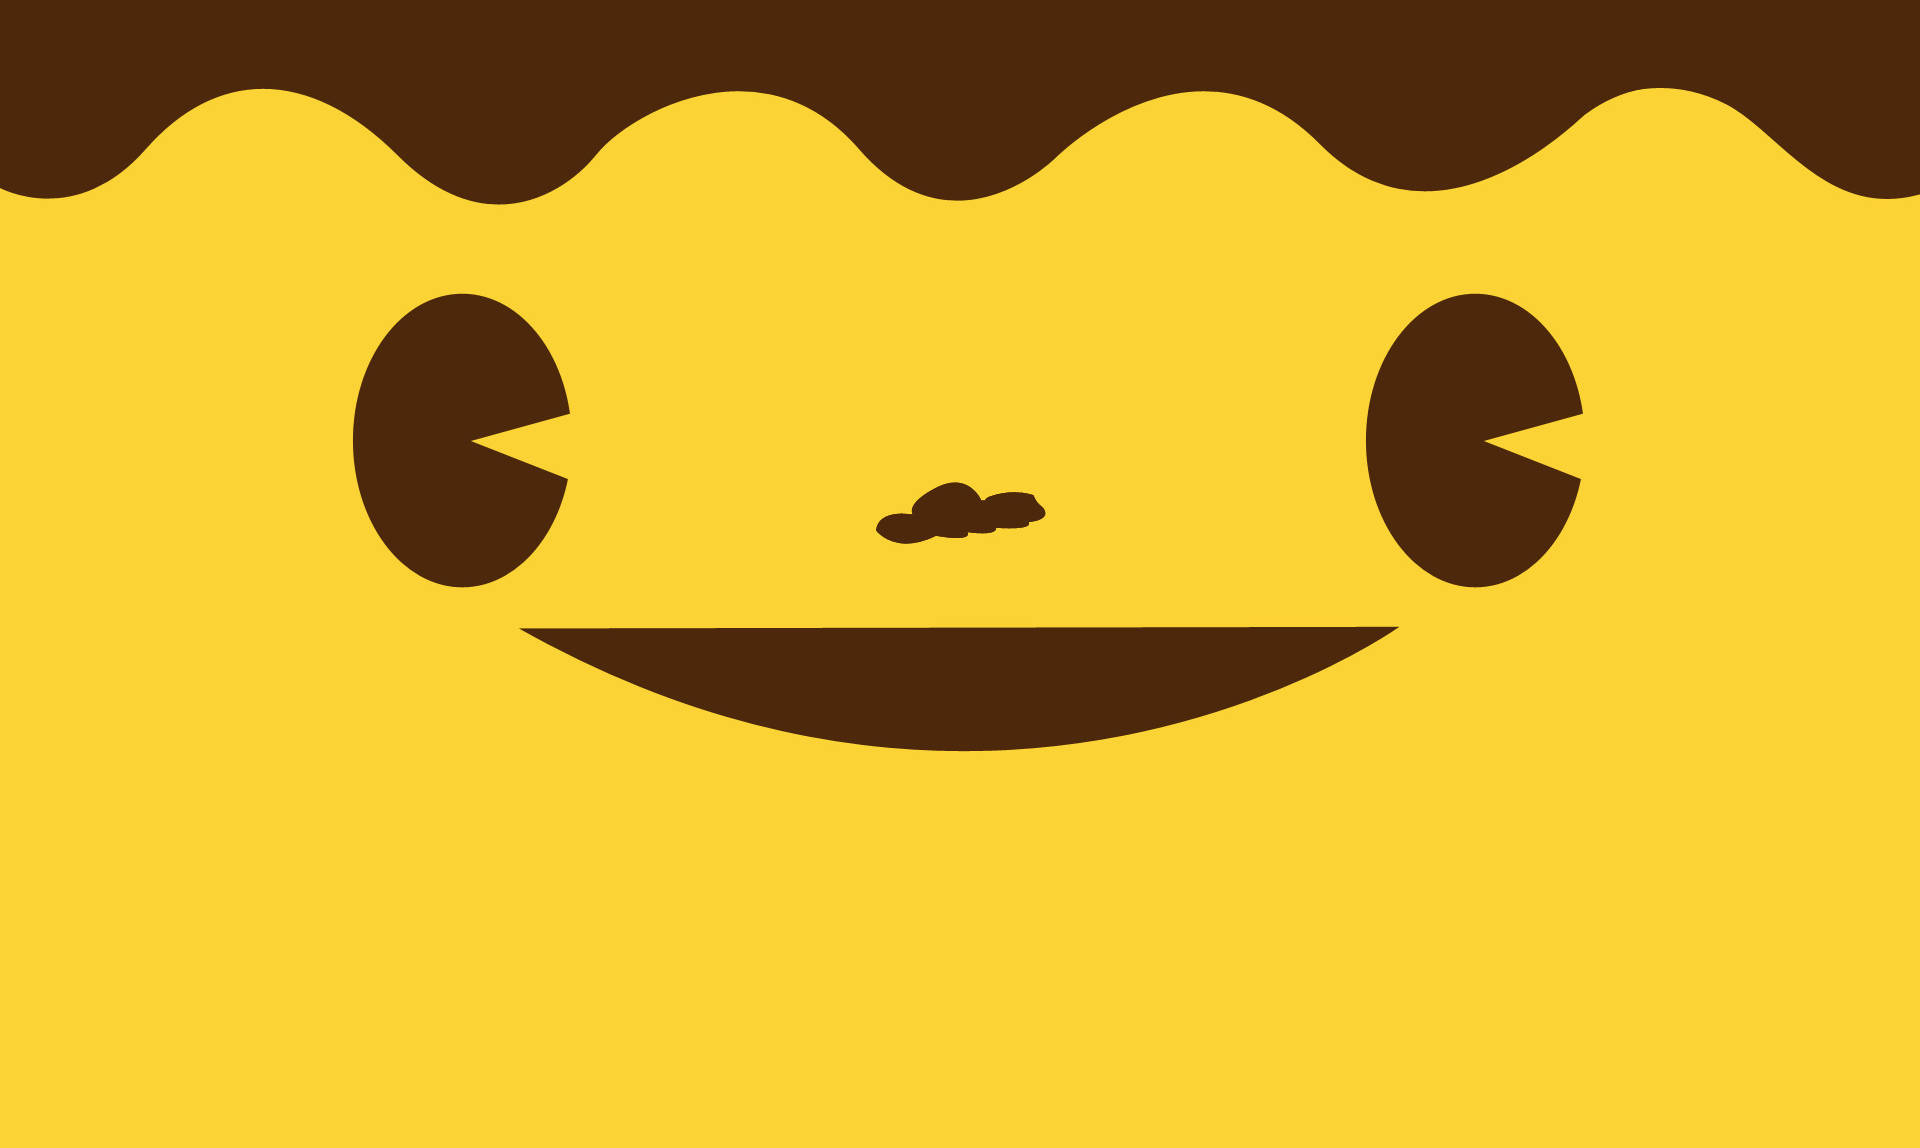 Big smiling pudding meme with happy face, color yellow wallpaper.